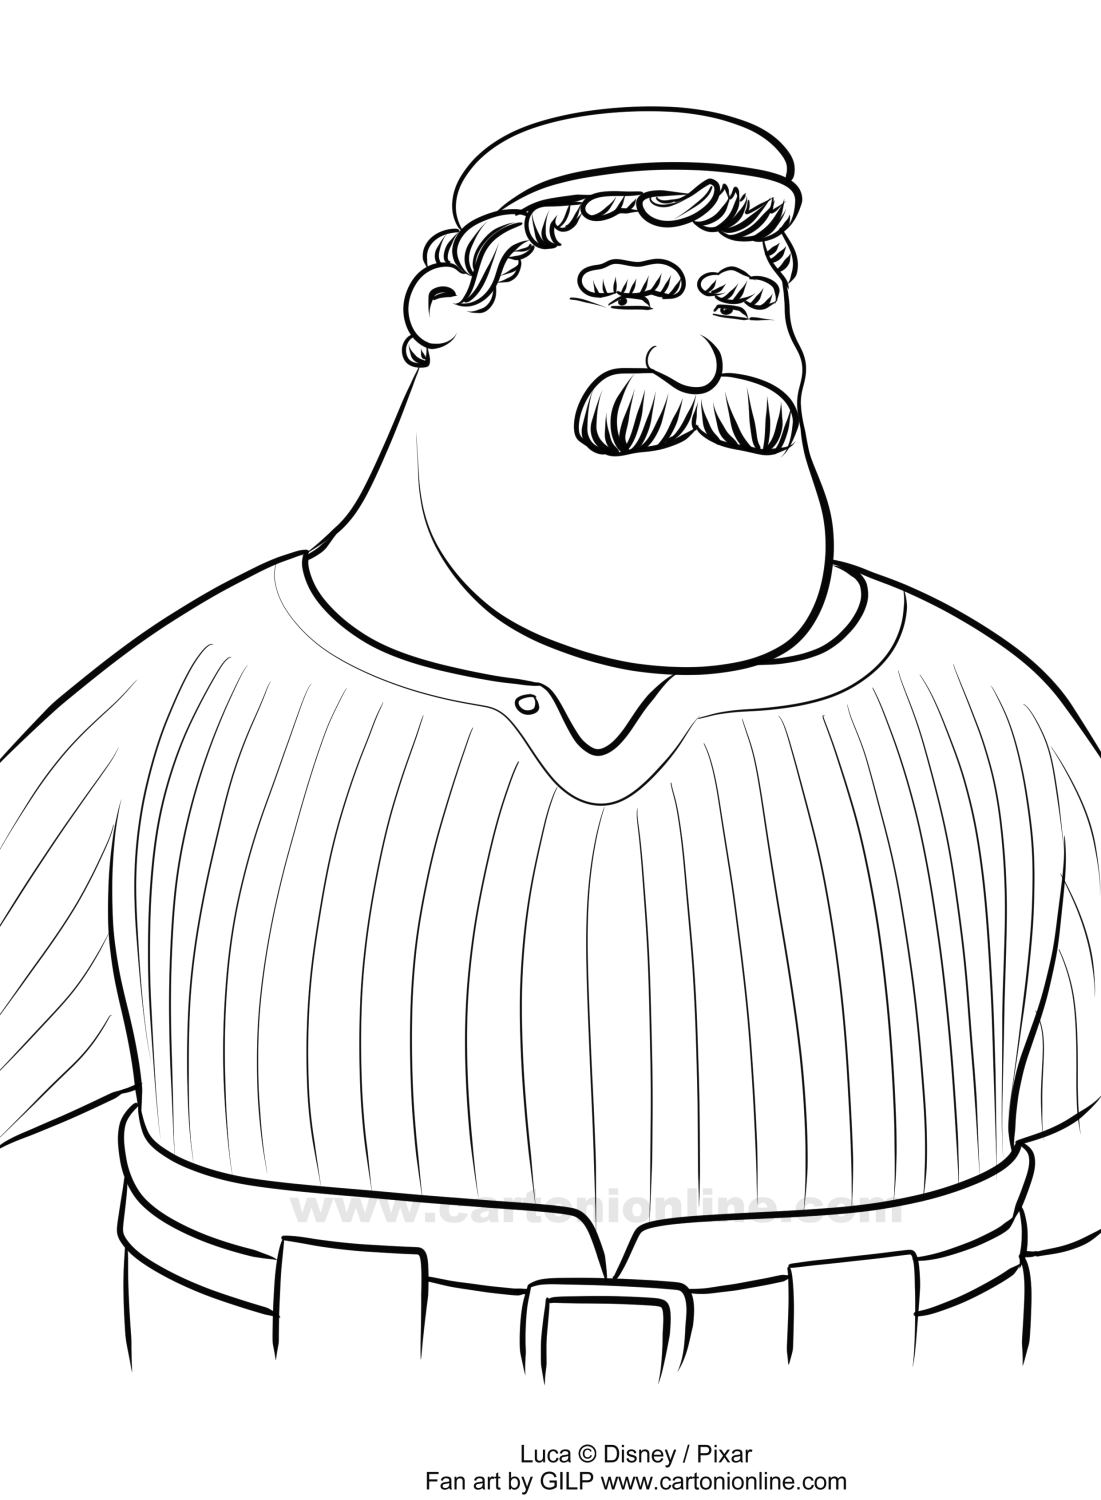 Massimo Marcovaldo from Luca (Disney/Pixar) coloring page to print and coloring